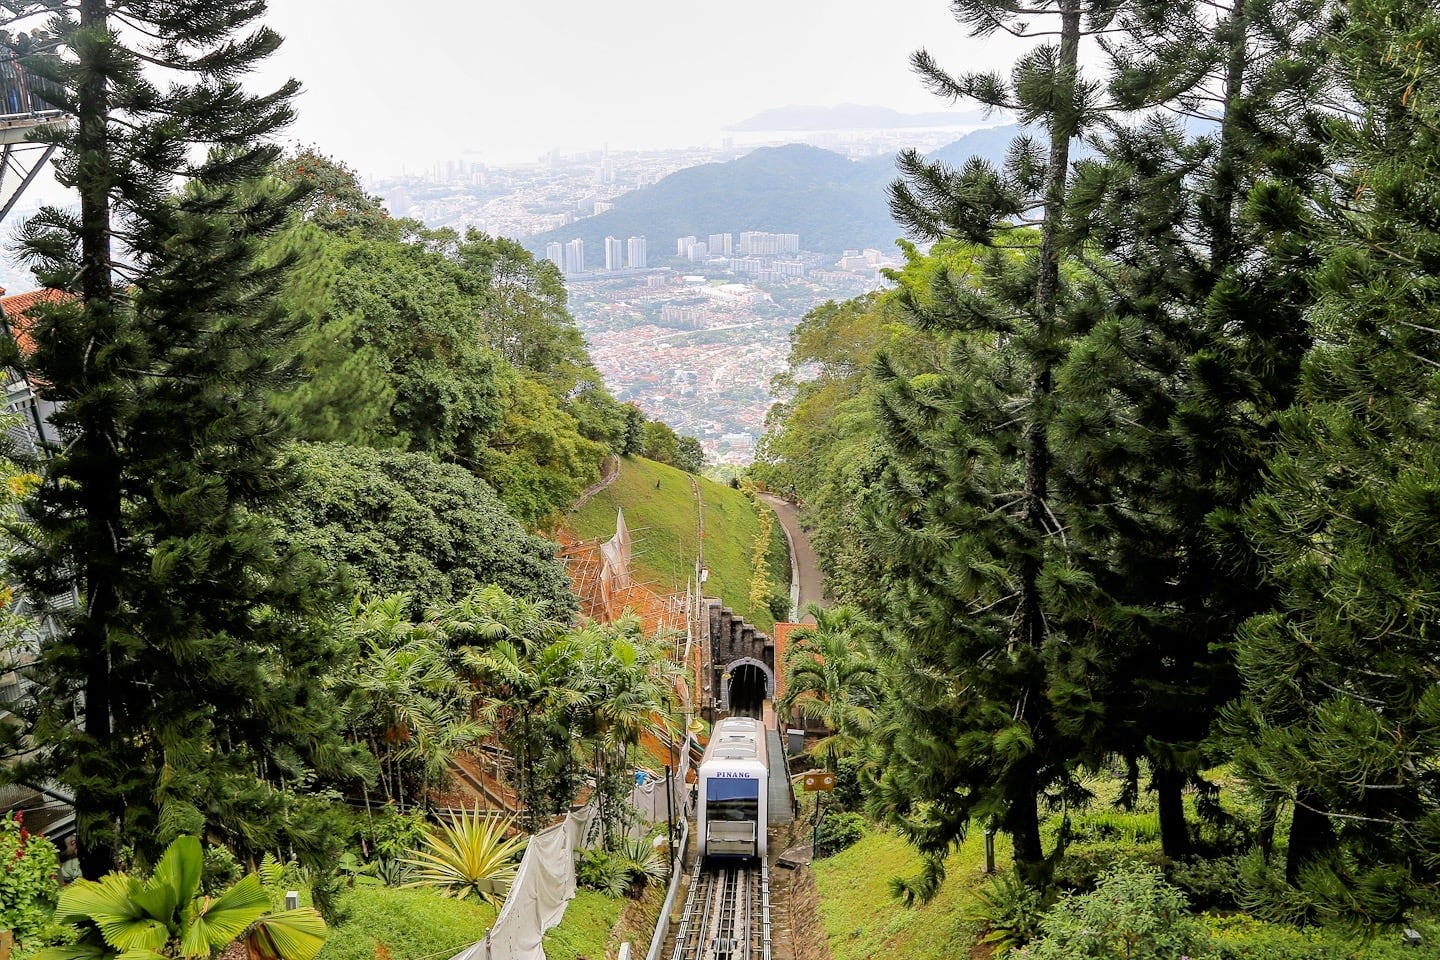 Penang Hill Railway funicular and city and mountains